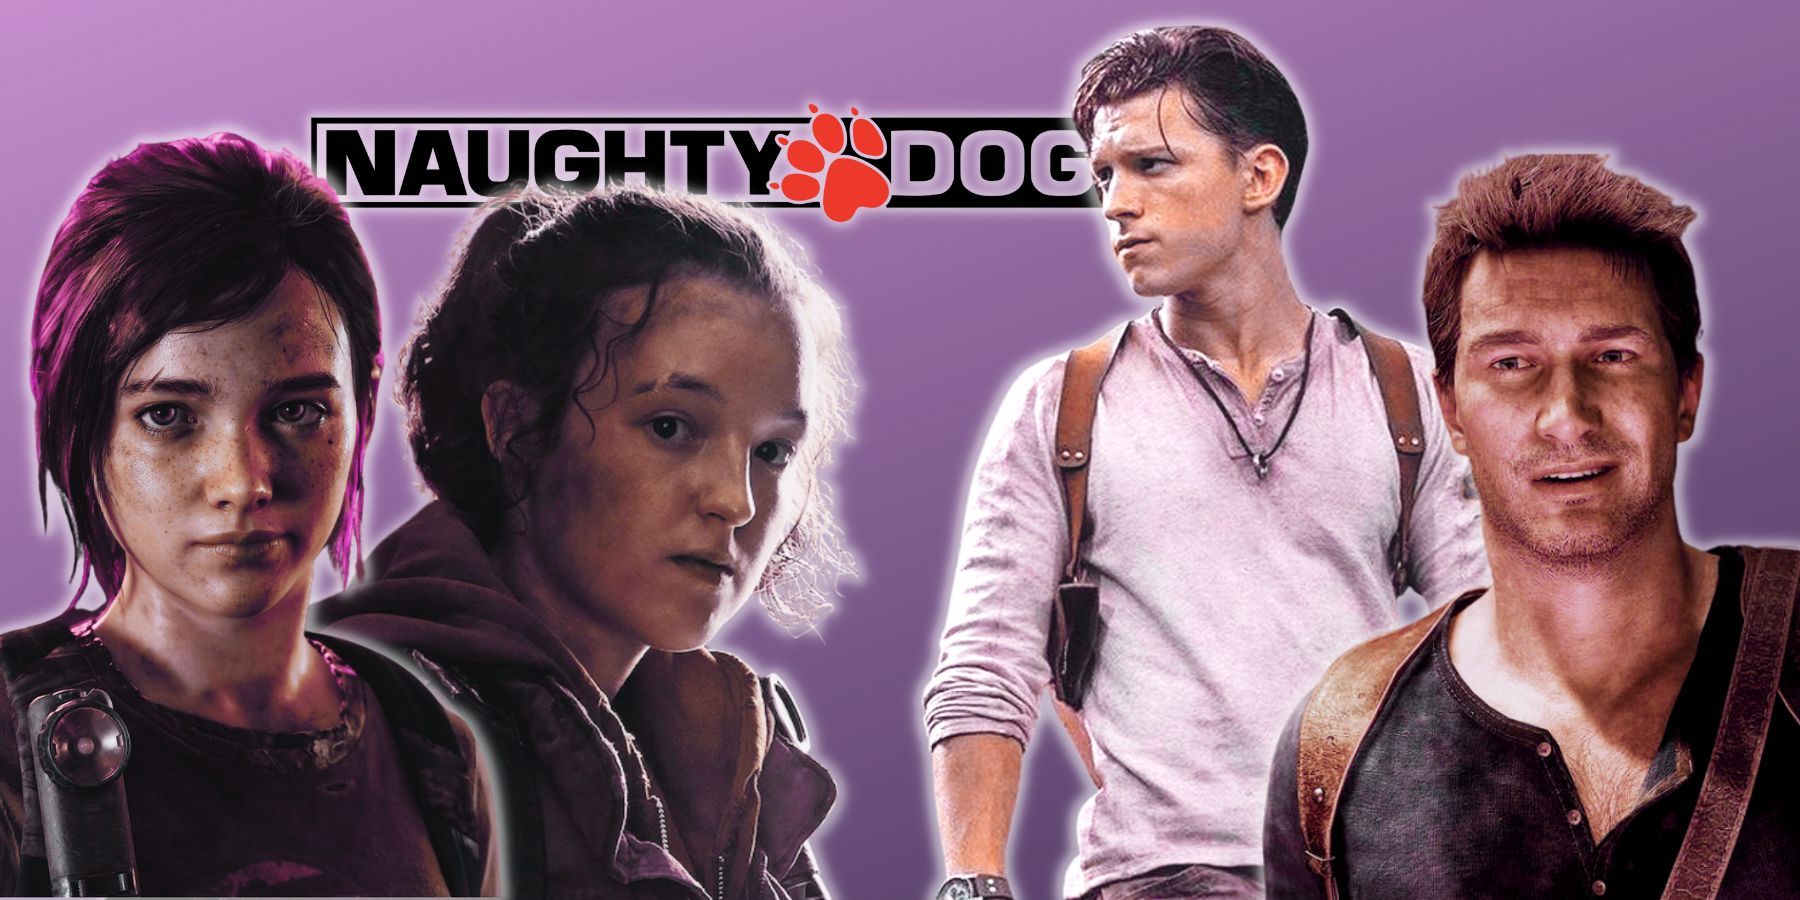 Naughty Dog Info 🐾 on X: Uncharted 4 has an IMDb score of 9.5 The Last of  Us has an IMDb score of 9.7 This makes them one of the highest rated